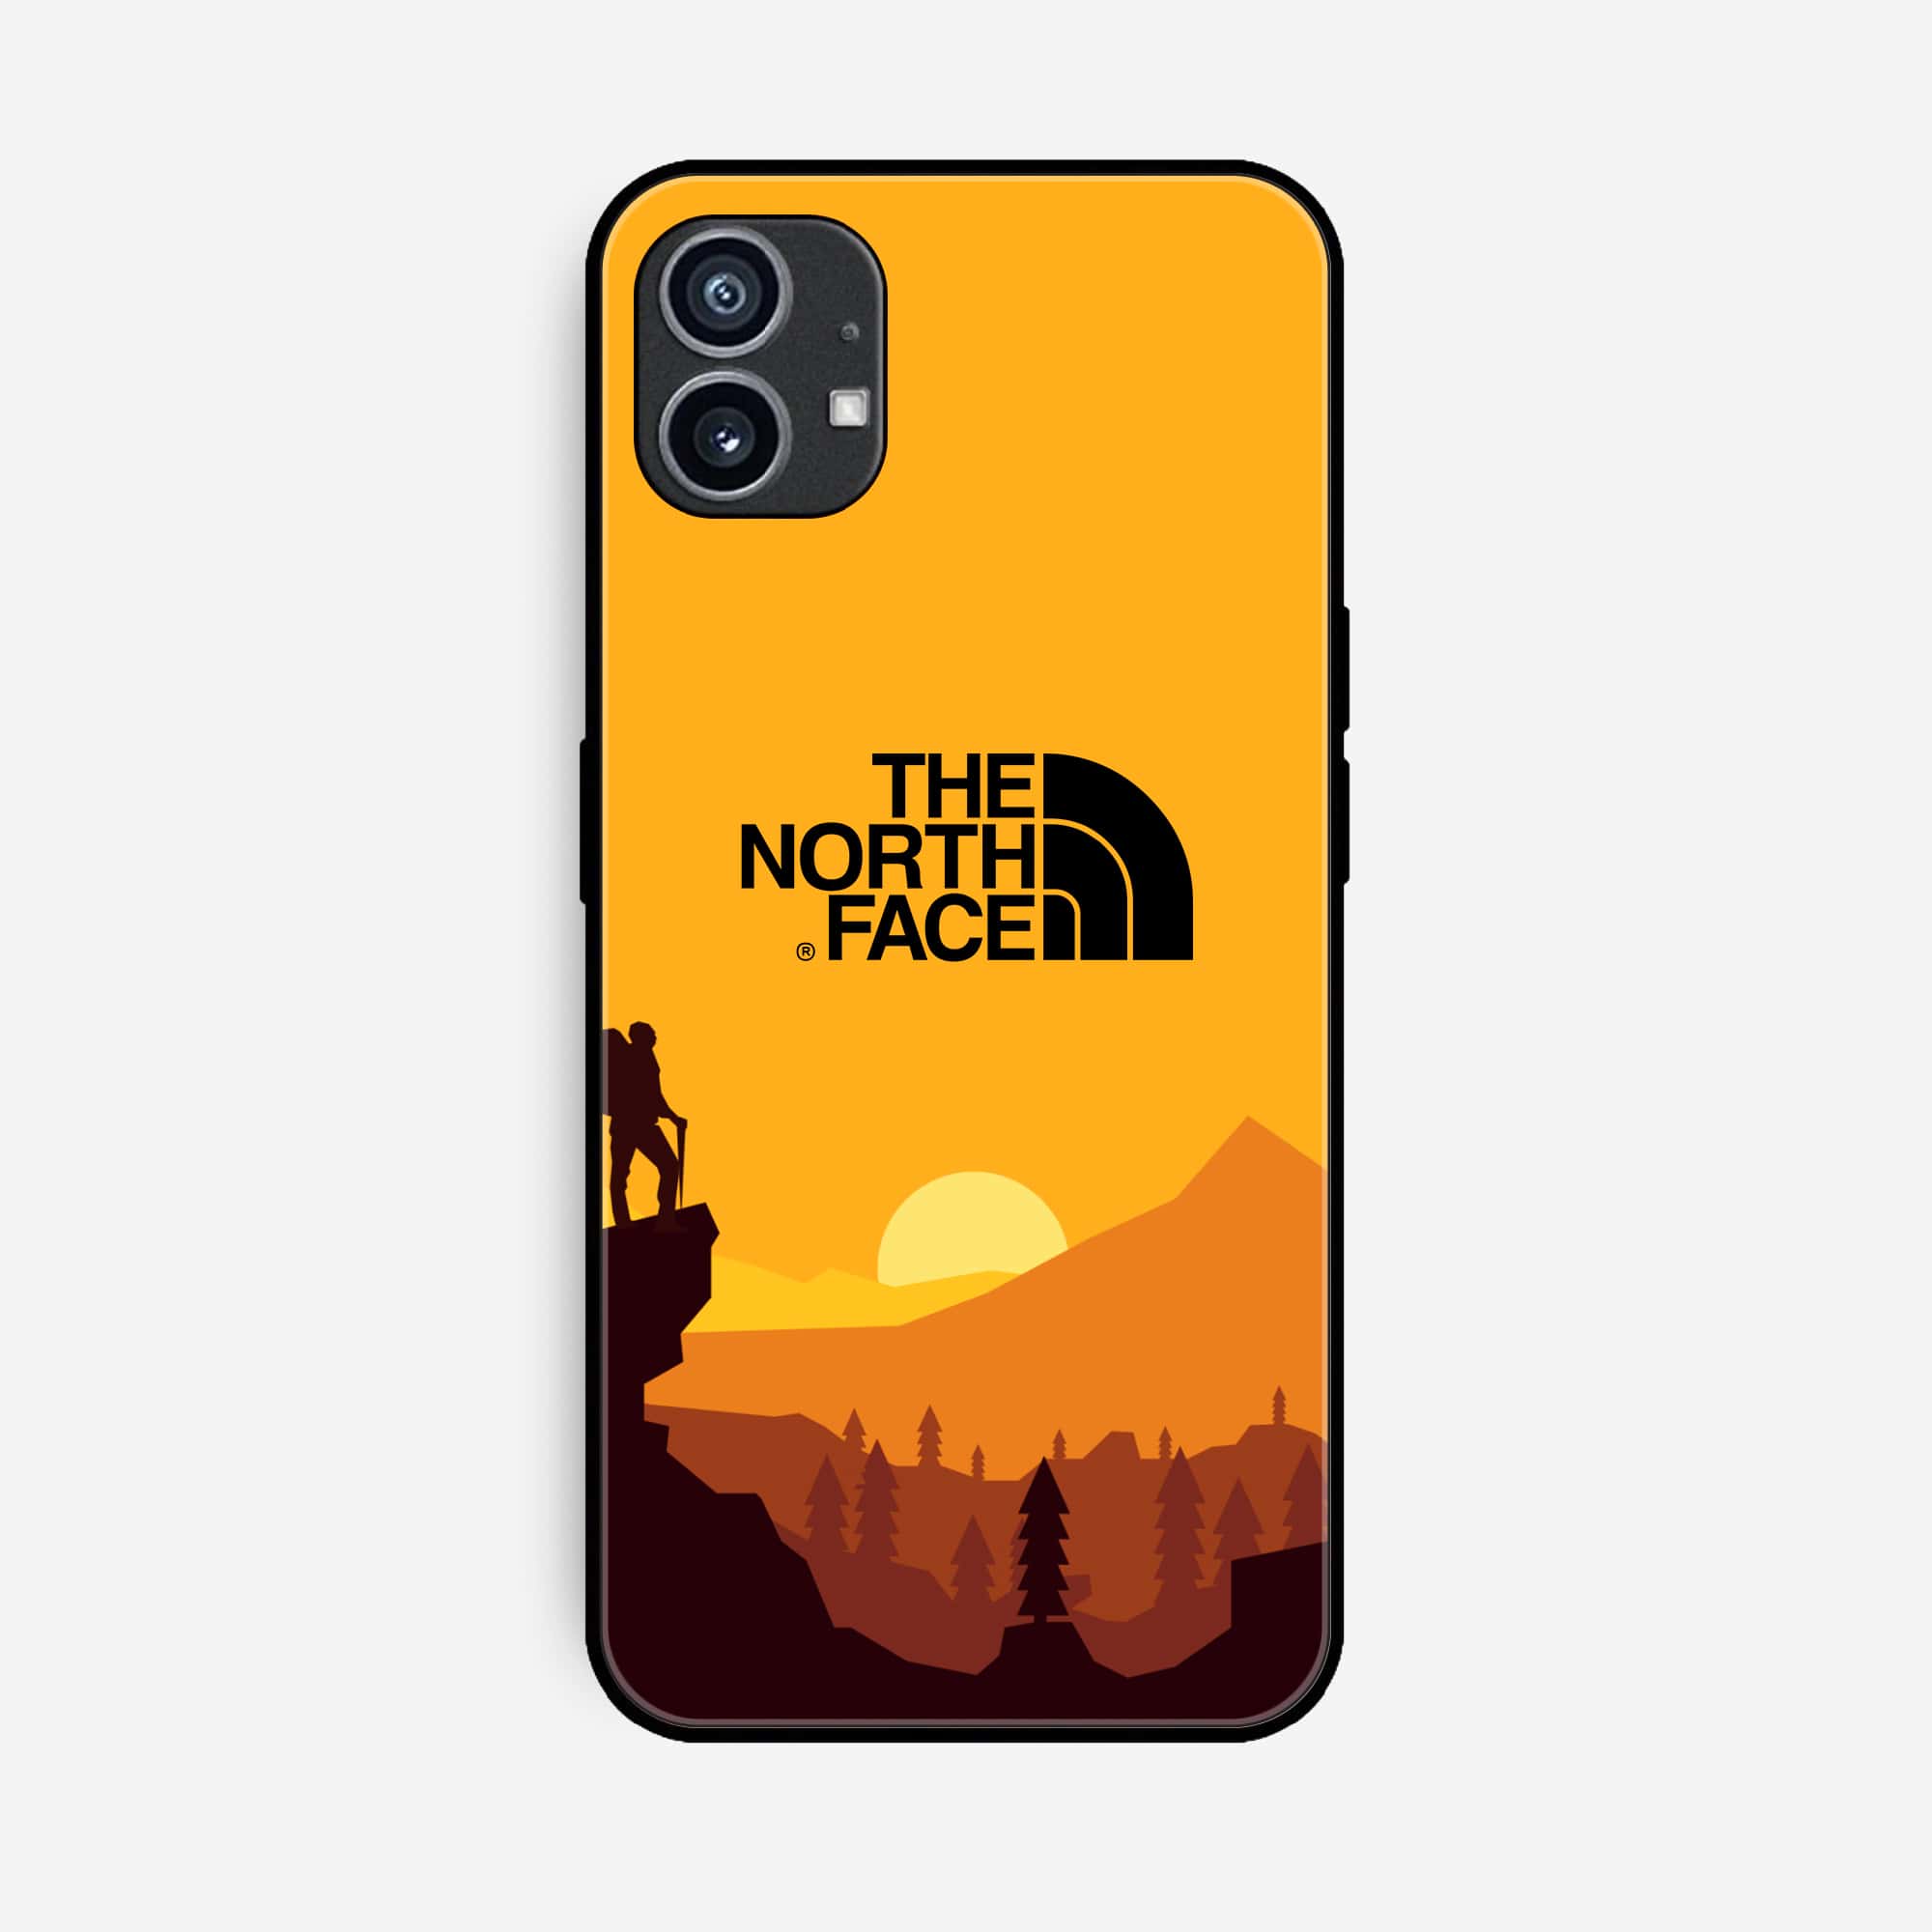 Nothing Phone (1) The North Face Series Premium Printed Glass soft Bumper shock Proof Case